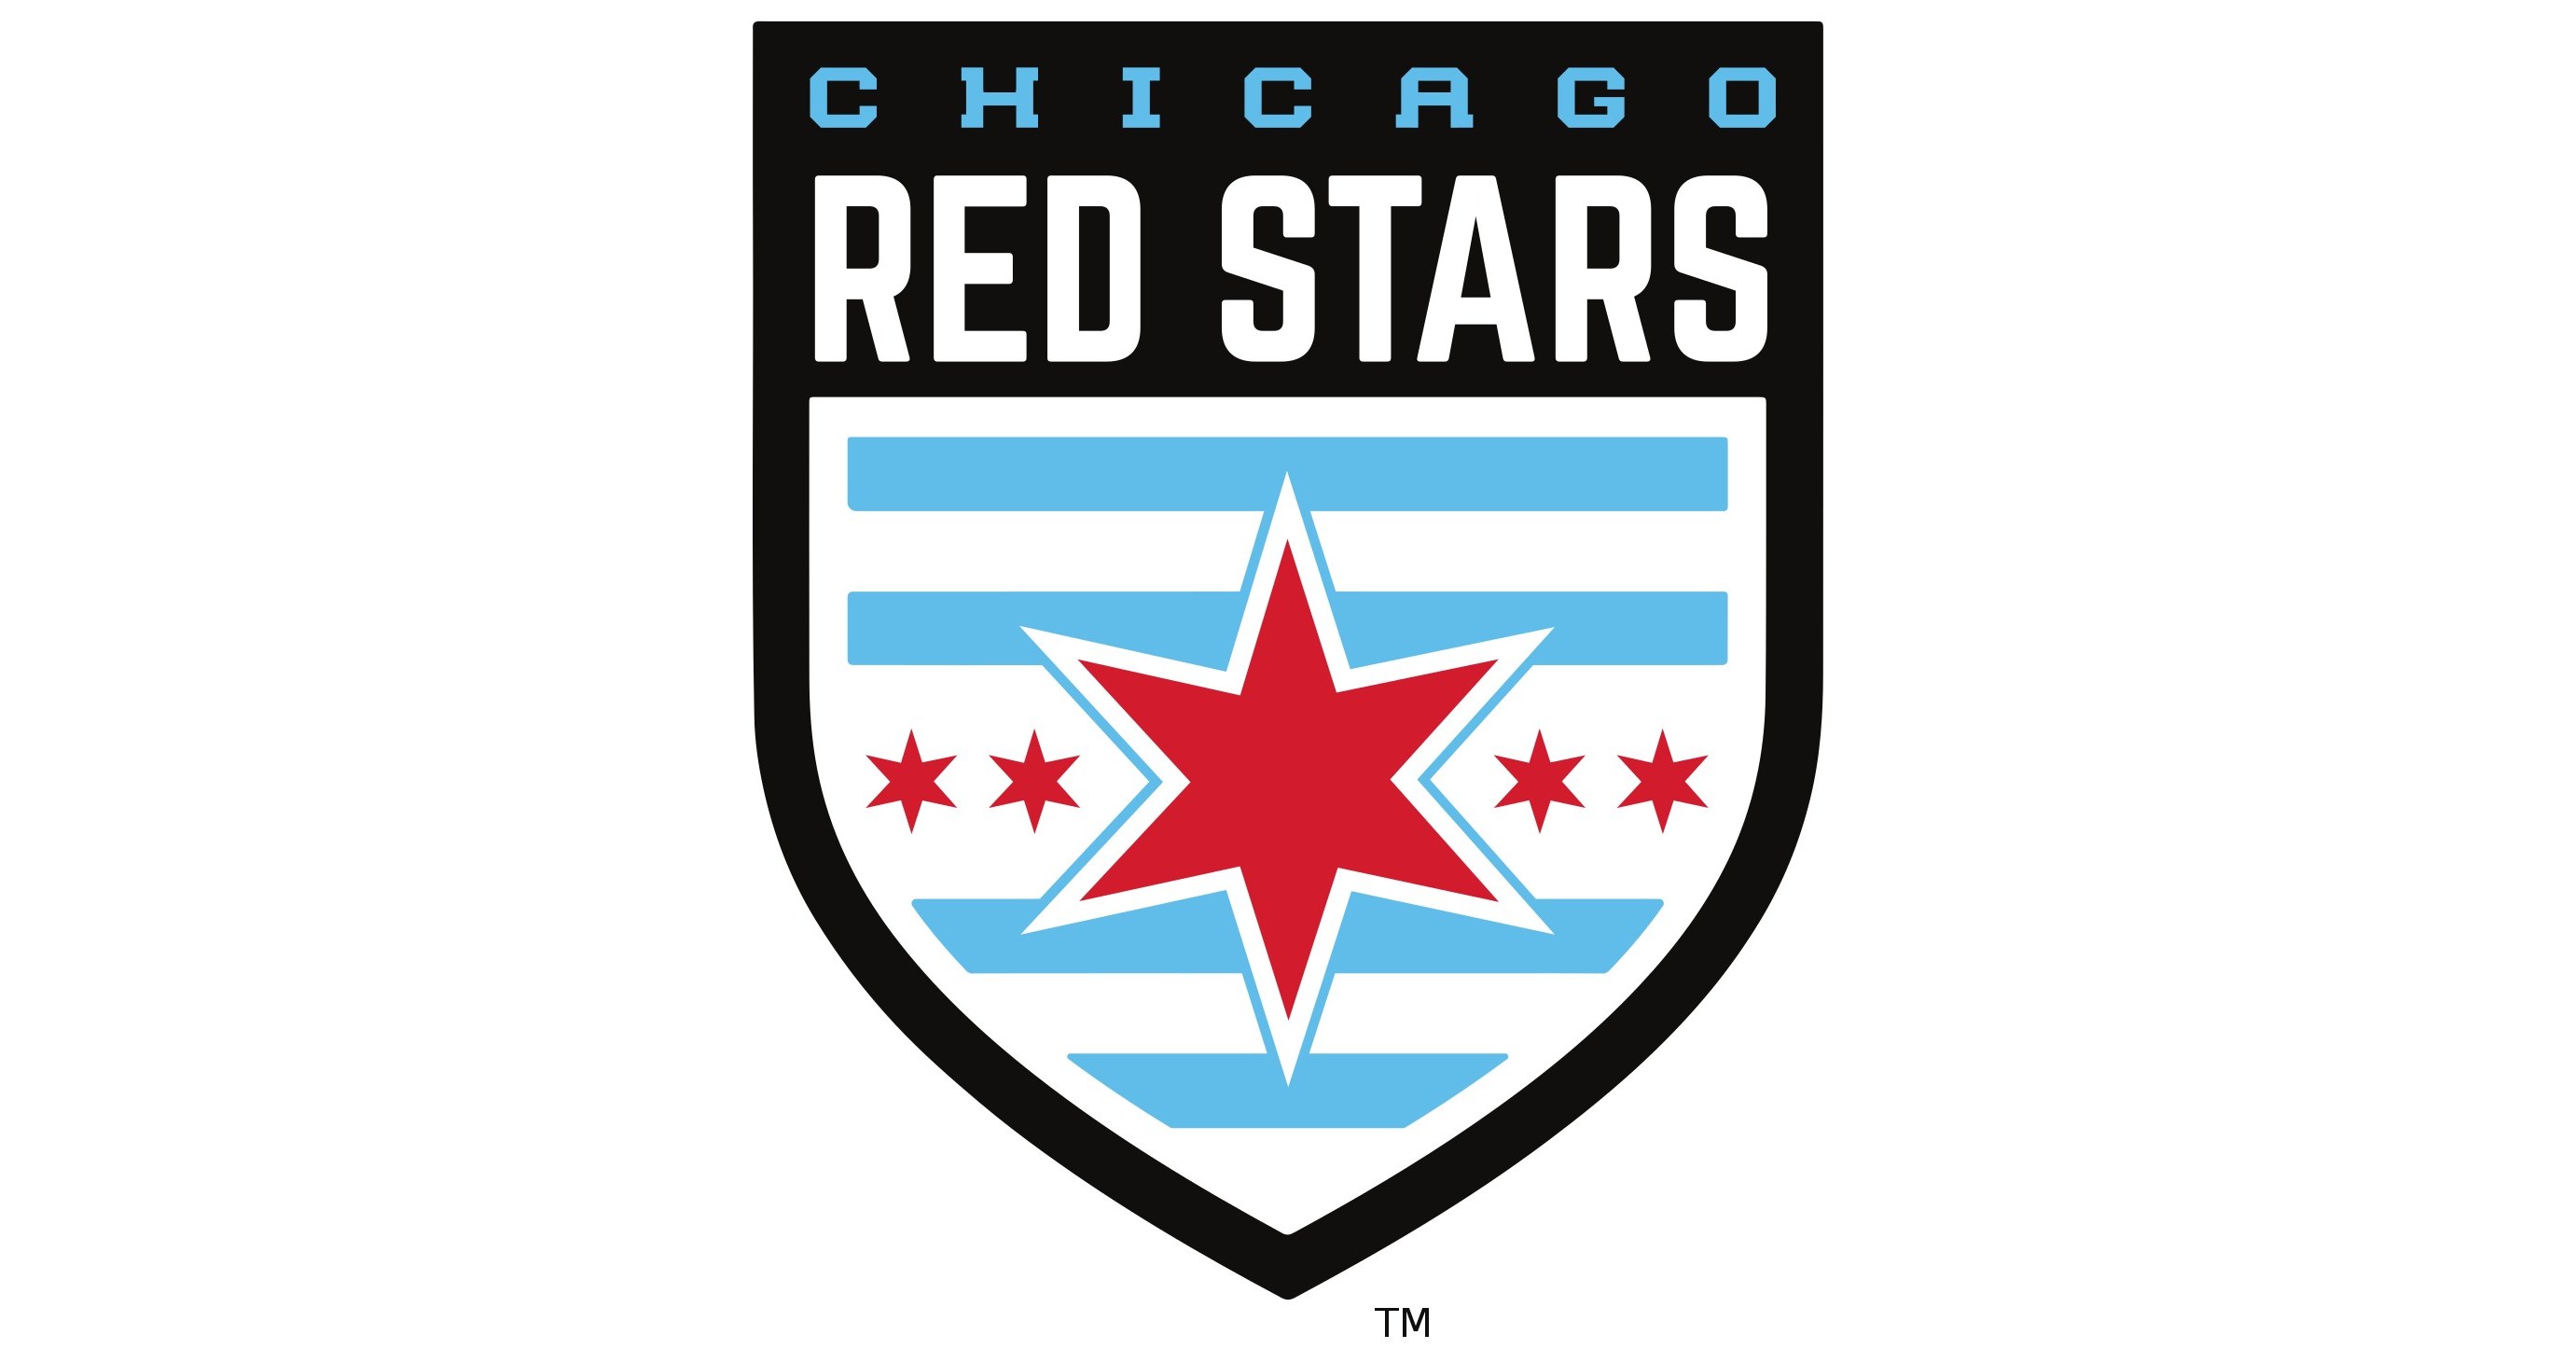 UNDONE BEAUTY ANNOUNCES PARTNERSHIP WITH WOMEN’S PROFESSIONAL SOCCER TEAM, THE CHICAGO RED STARS